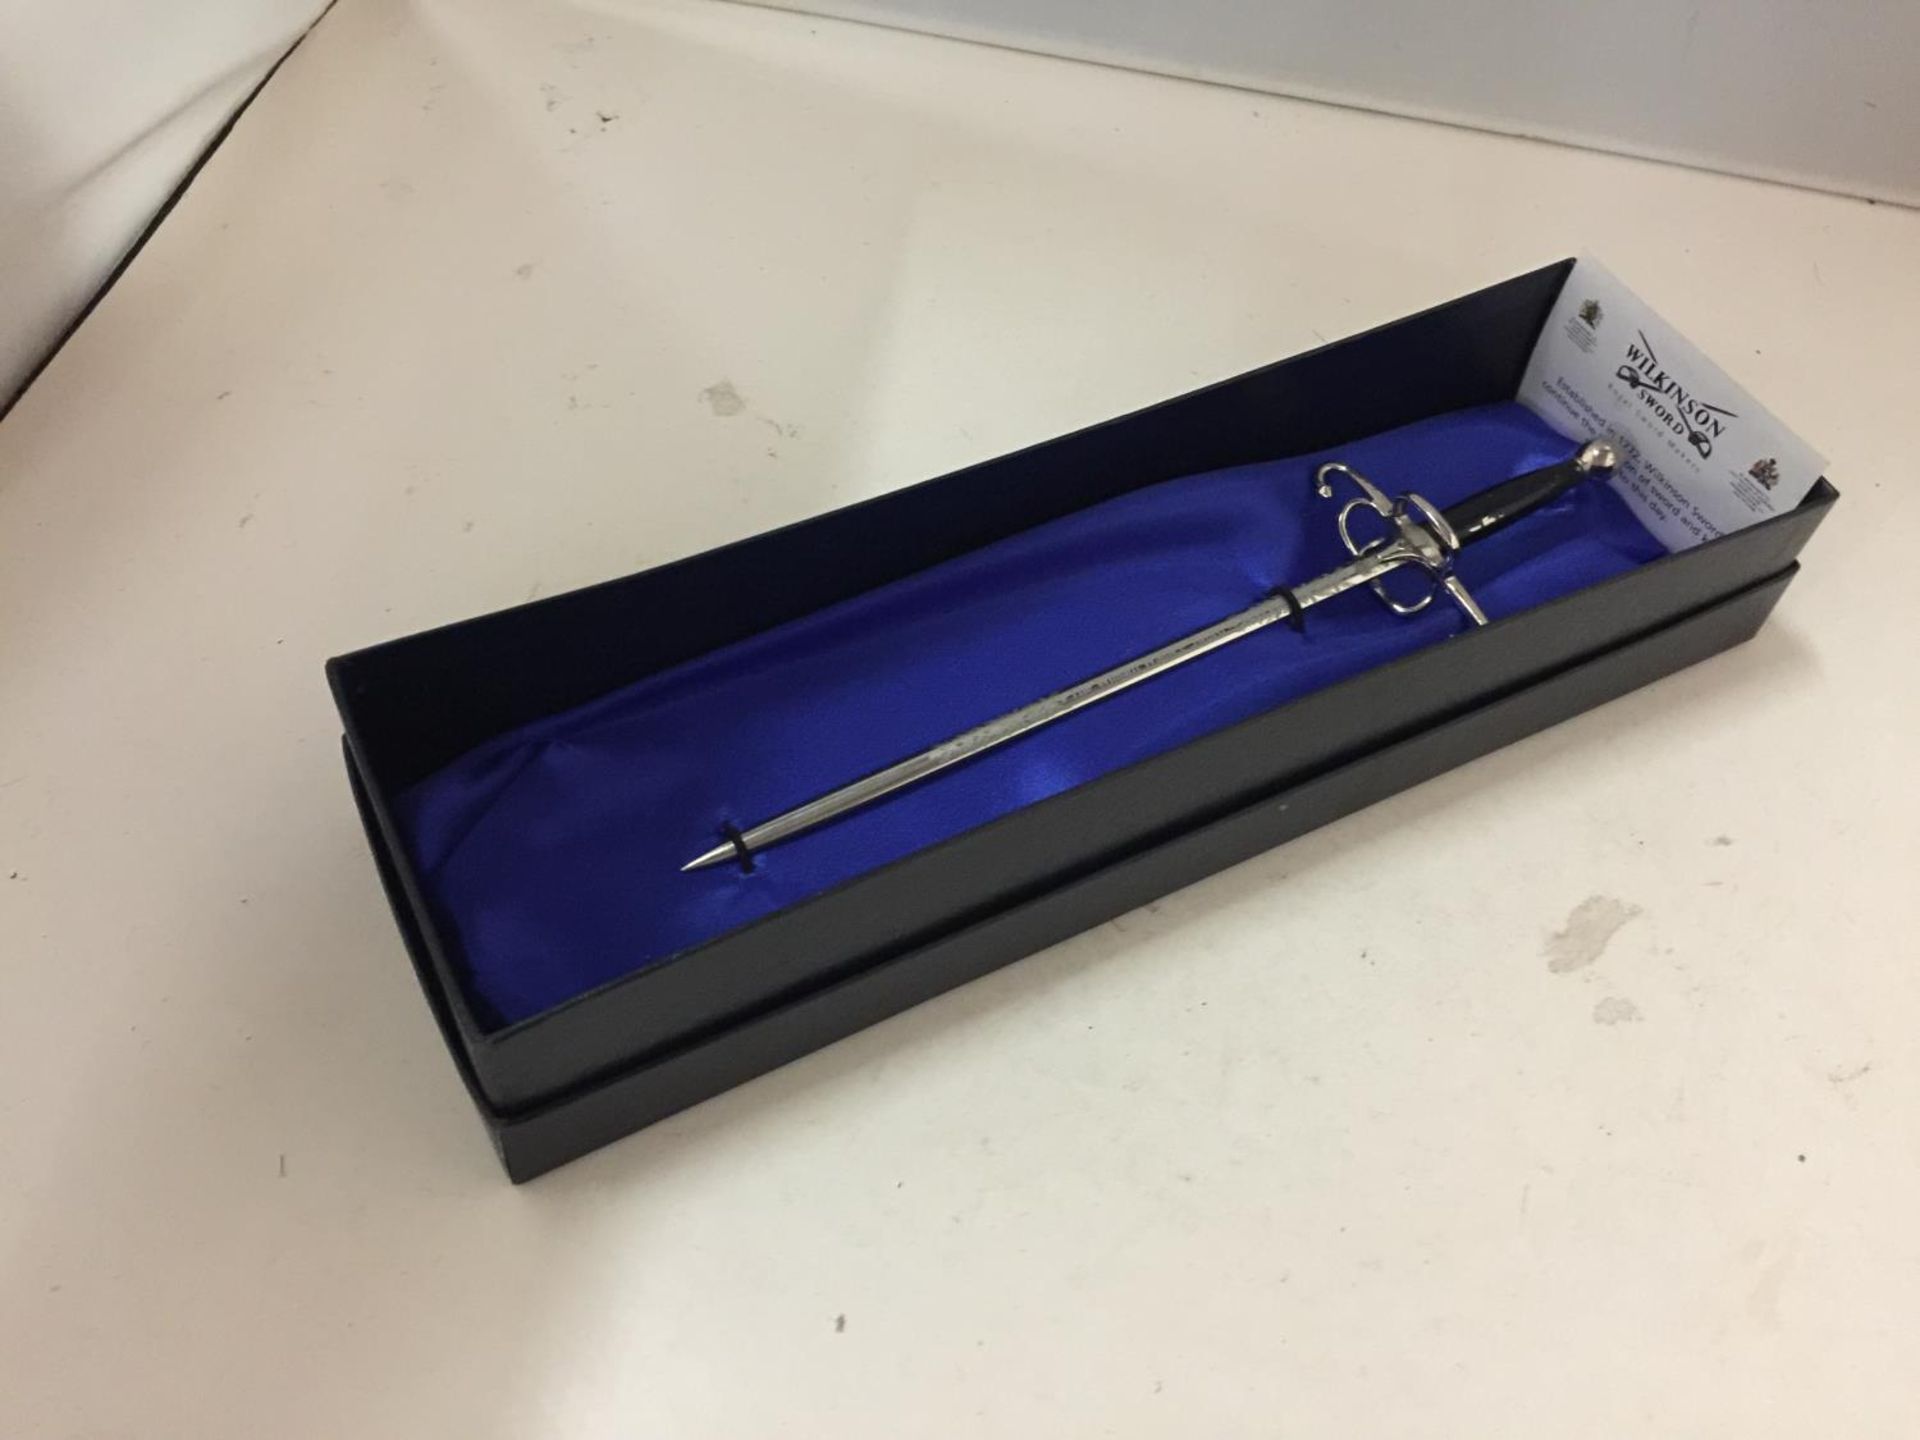 A BOXED REPLICA OF THE SIR WILLIAM WALLACE SWORD BY WILKINSON SWORD